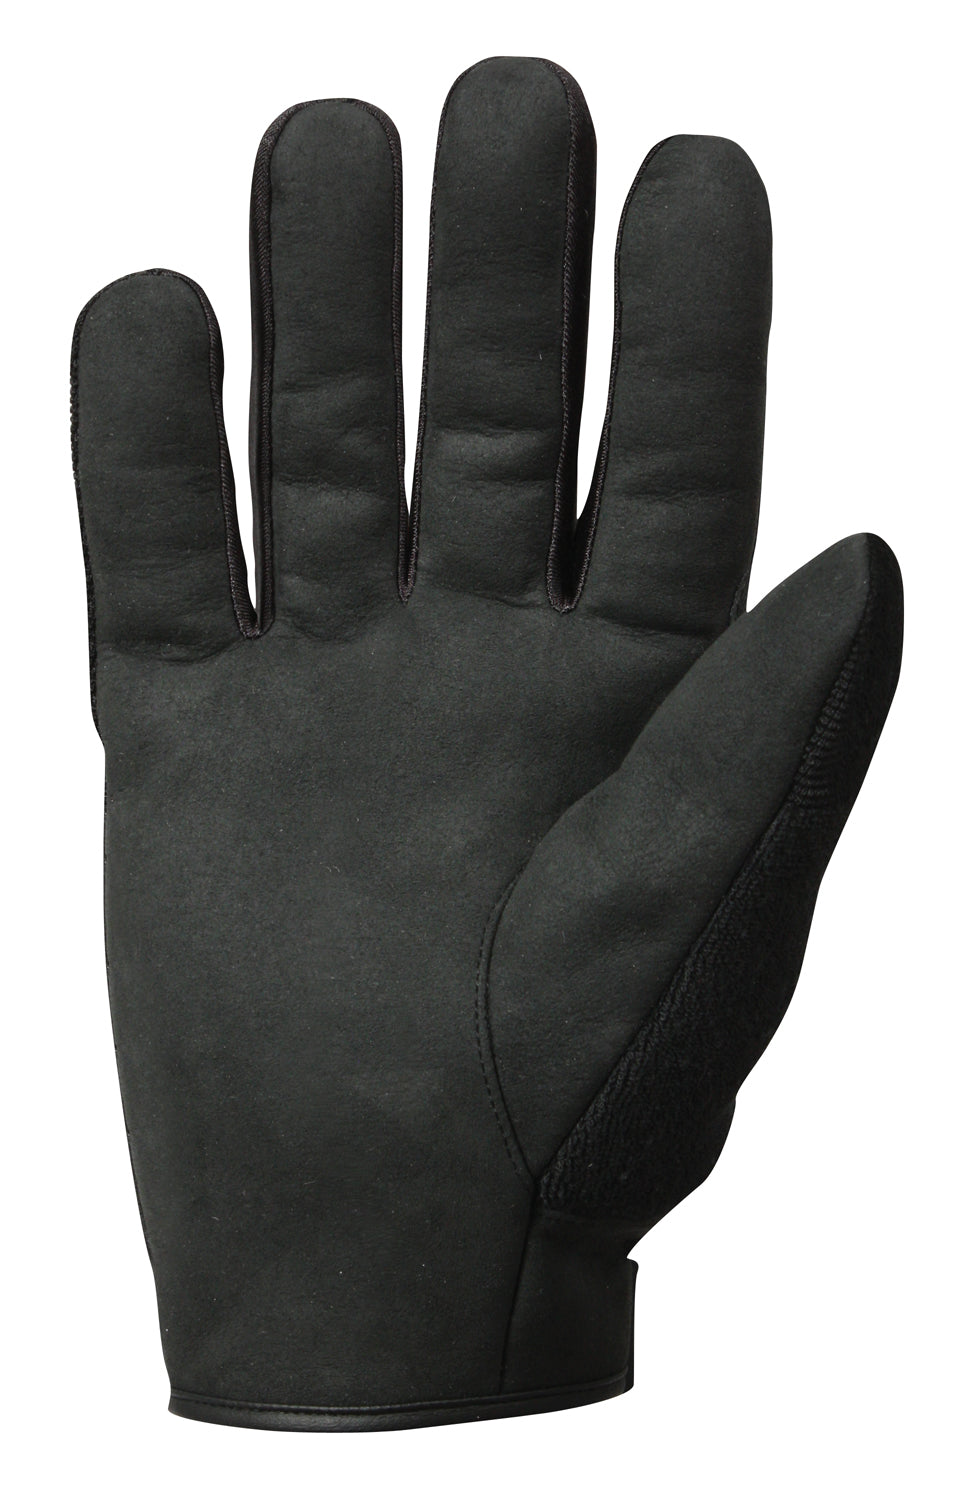 Rothco Cold Weather Street Shield Gloves